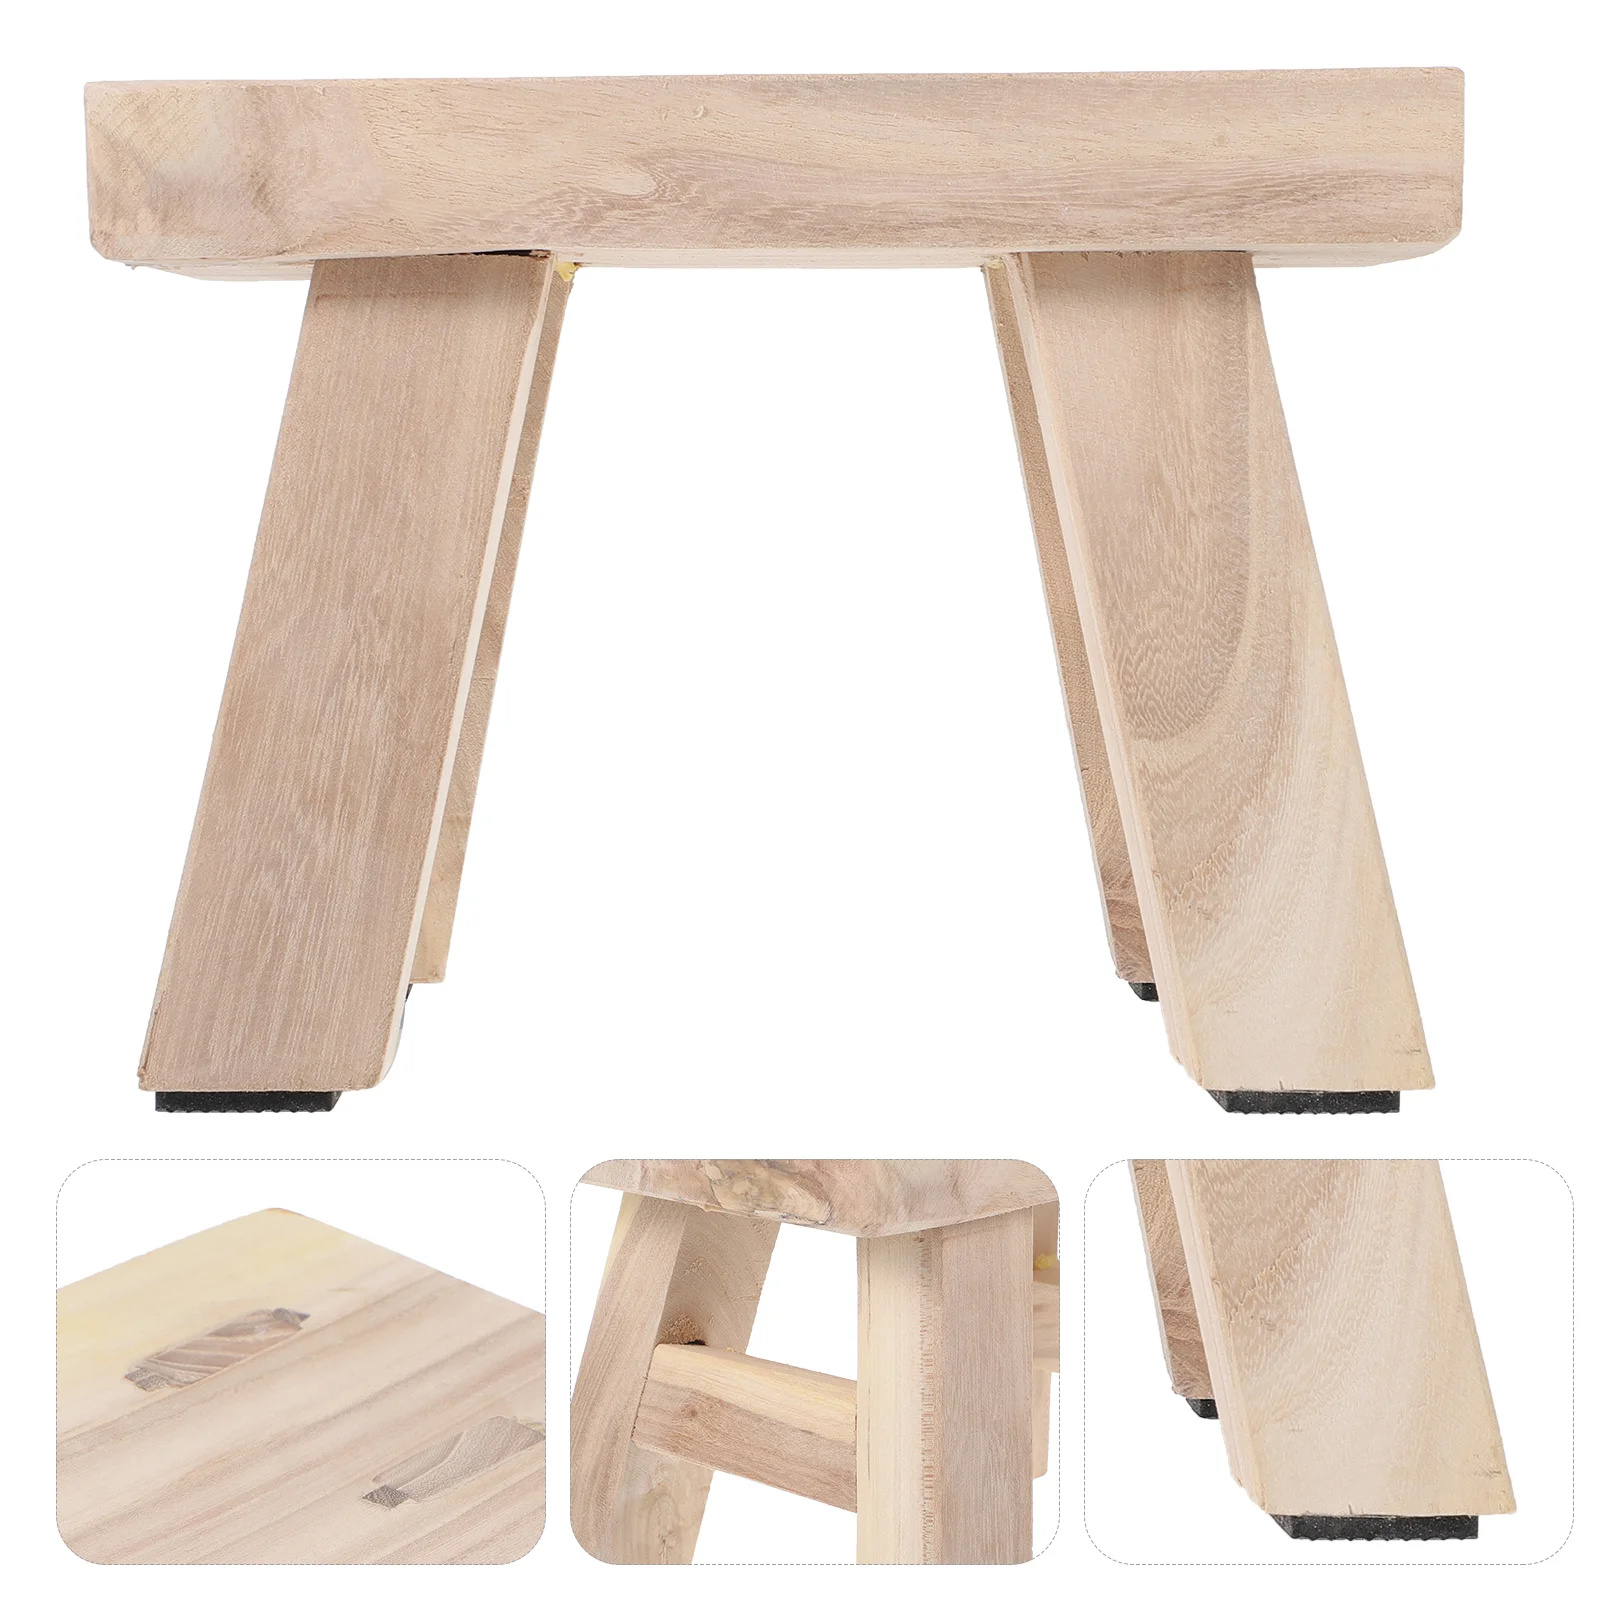 

Solid Wood Bench Small Wooden Stool Kids Footstool Household Stools Sit on Toddler Step Child Chairs